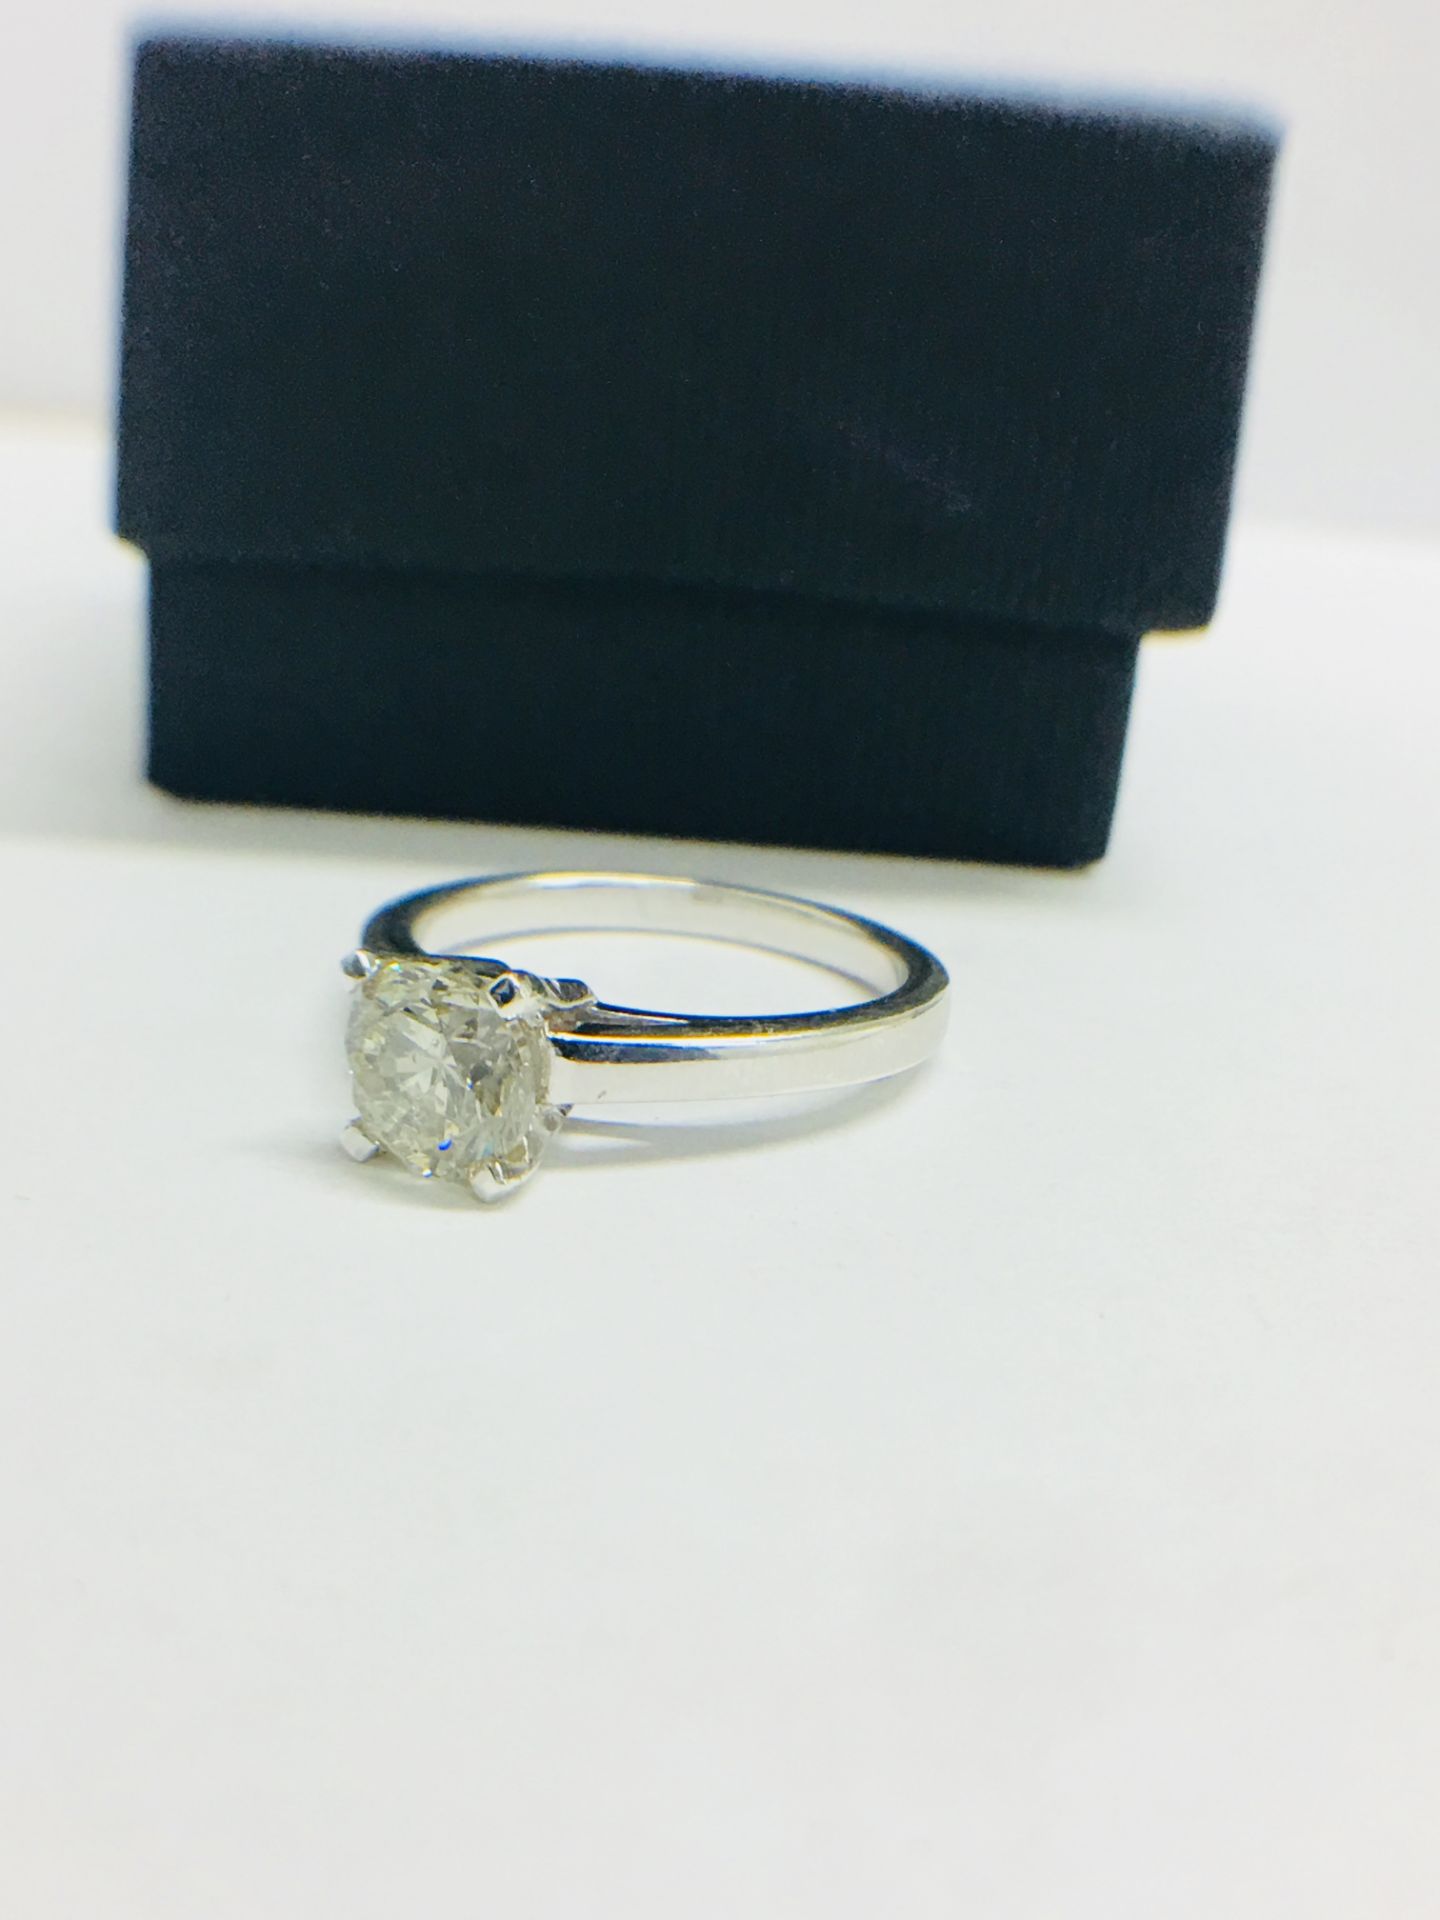 1.23Ct Diamond Solitaire Ring With A Brilliant Cut Diamond. - Image 2 of 8